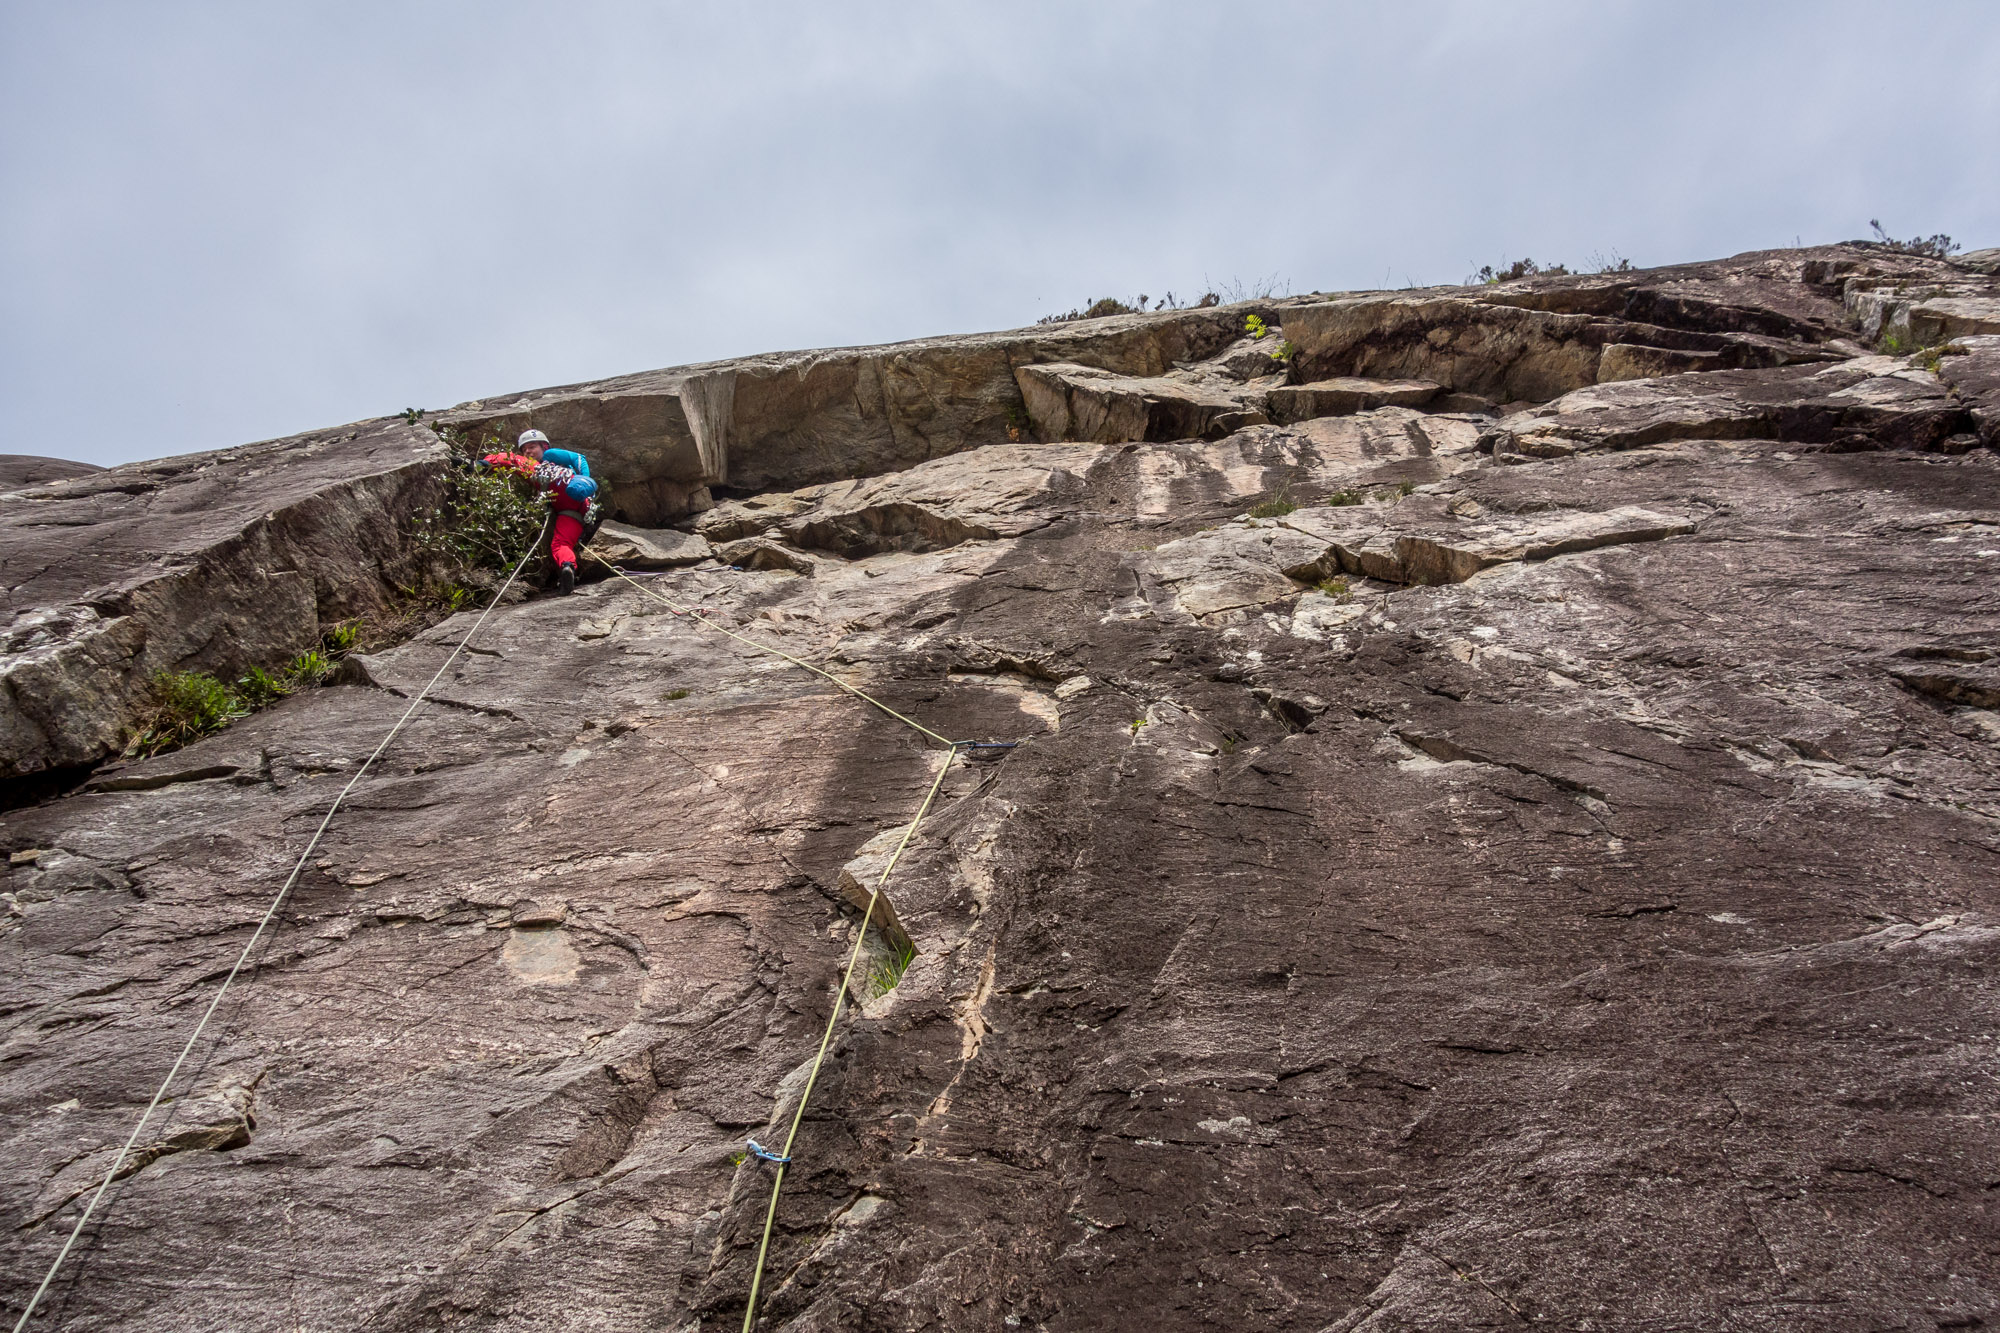 scottish summer rock climbing on route one diabaig